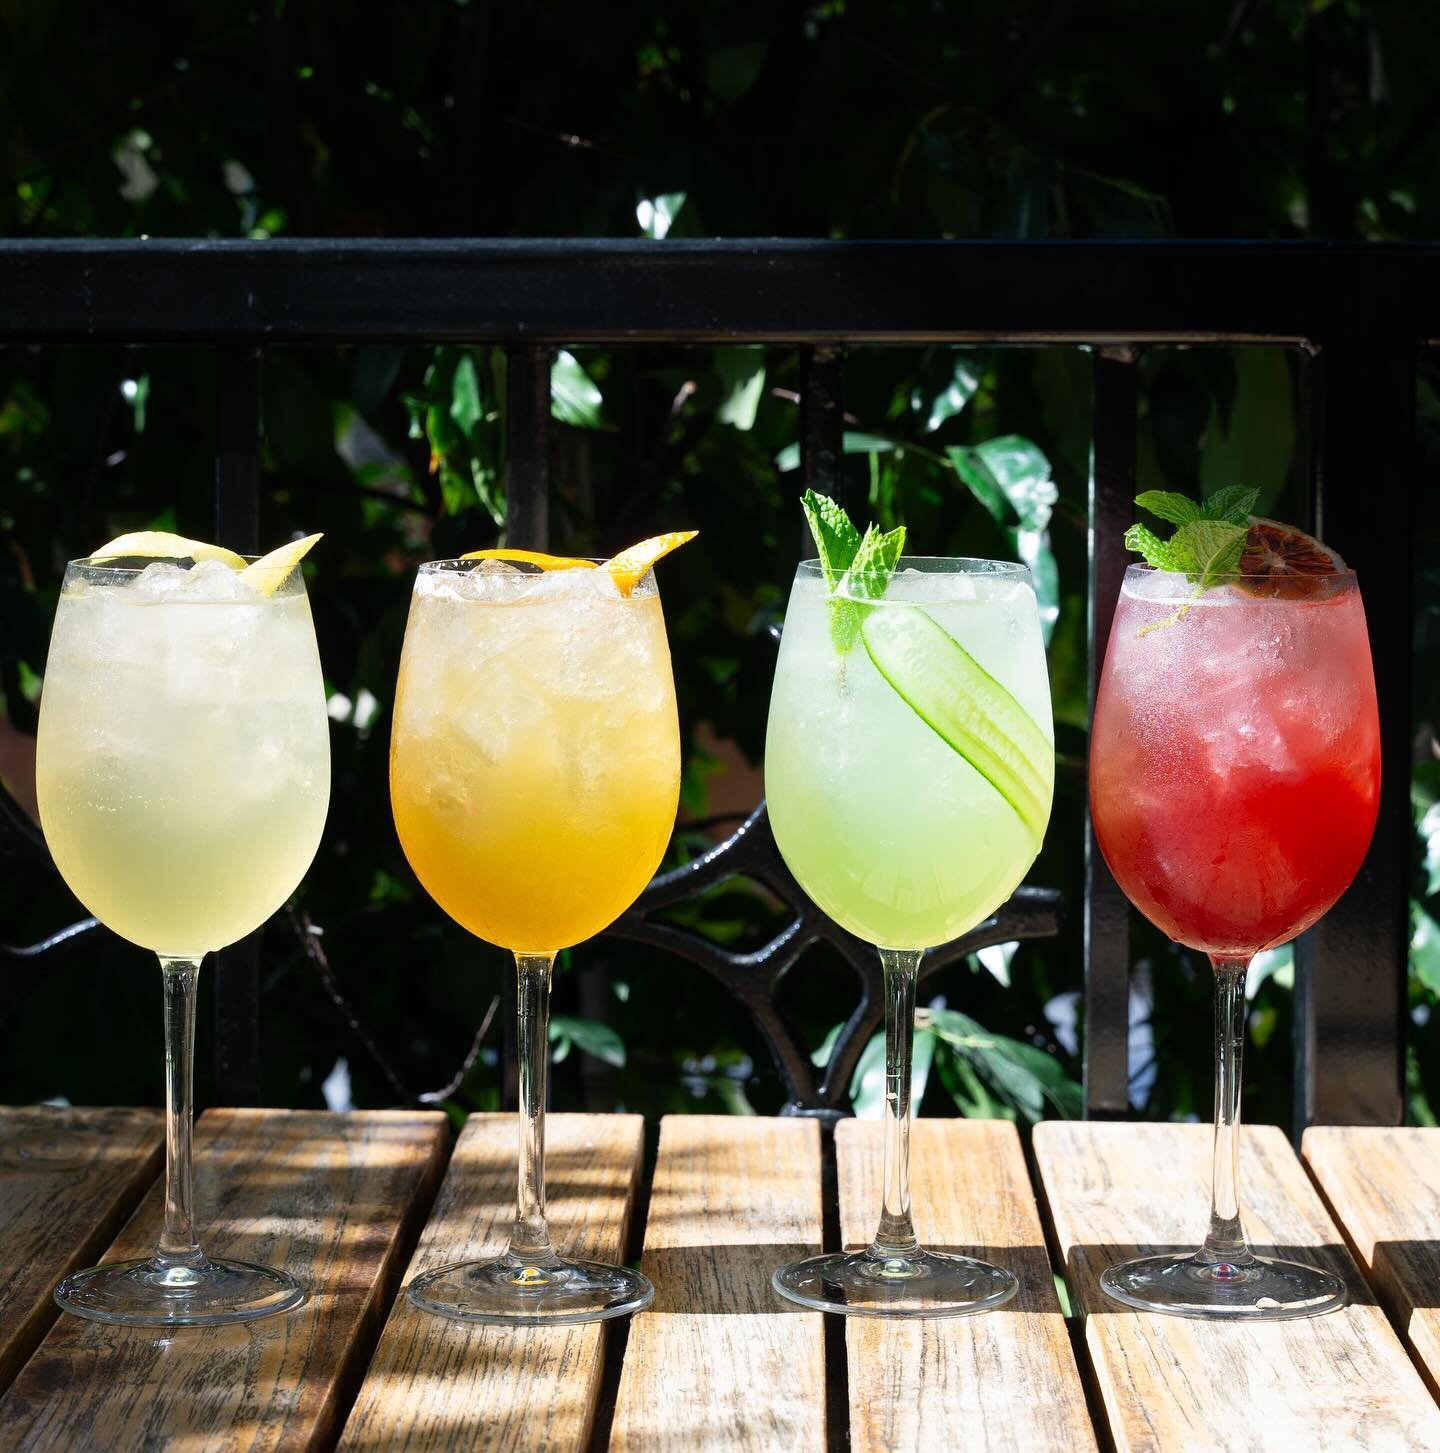 Who is in the mood for a spritz? We just added 4 new spritzers perfect for sipping  on a sunny day to the Brunch menu🍹☀️

Citrus Spritz 
Sirene apertif, dry cura&ccedil;ao, lemon &amp; soda water 

Amaro Spritz 
Amaro Nonino, Amari Lucano, lemon &am